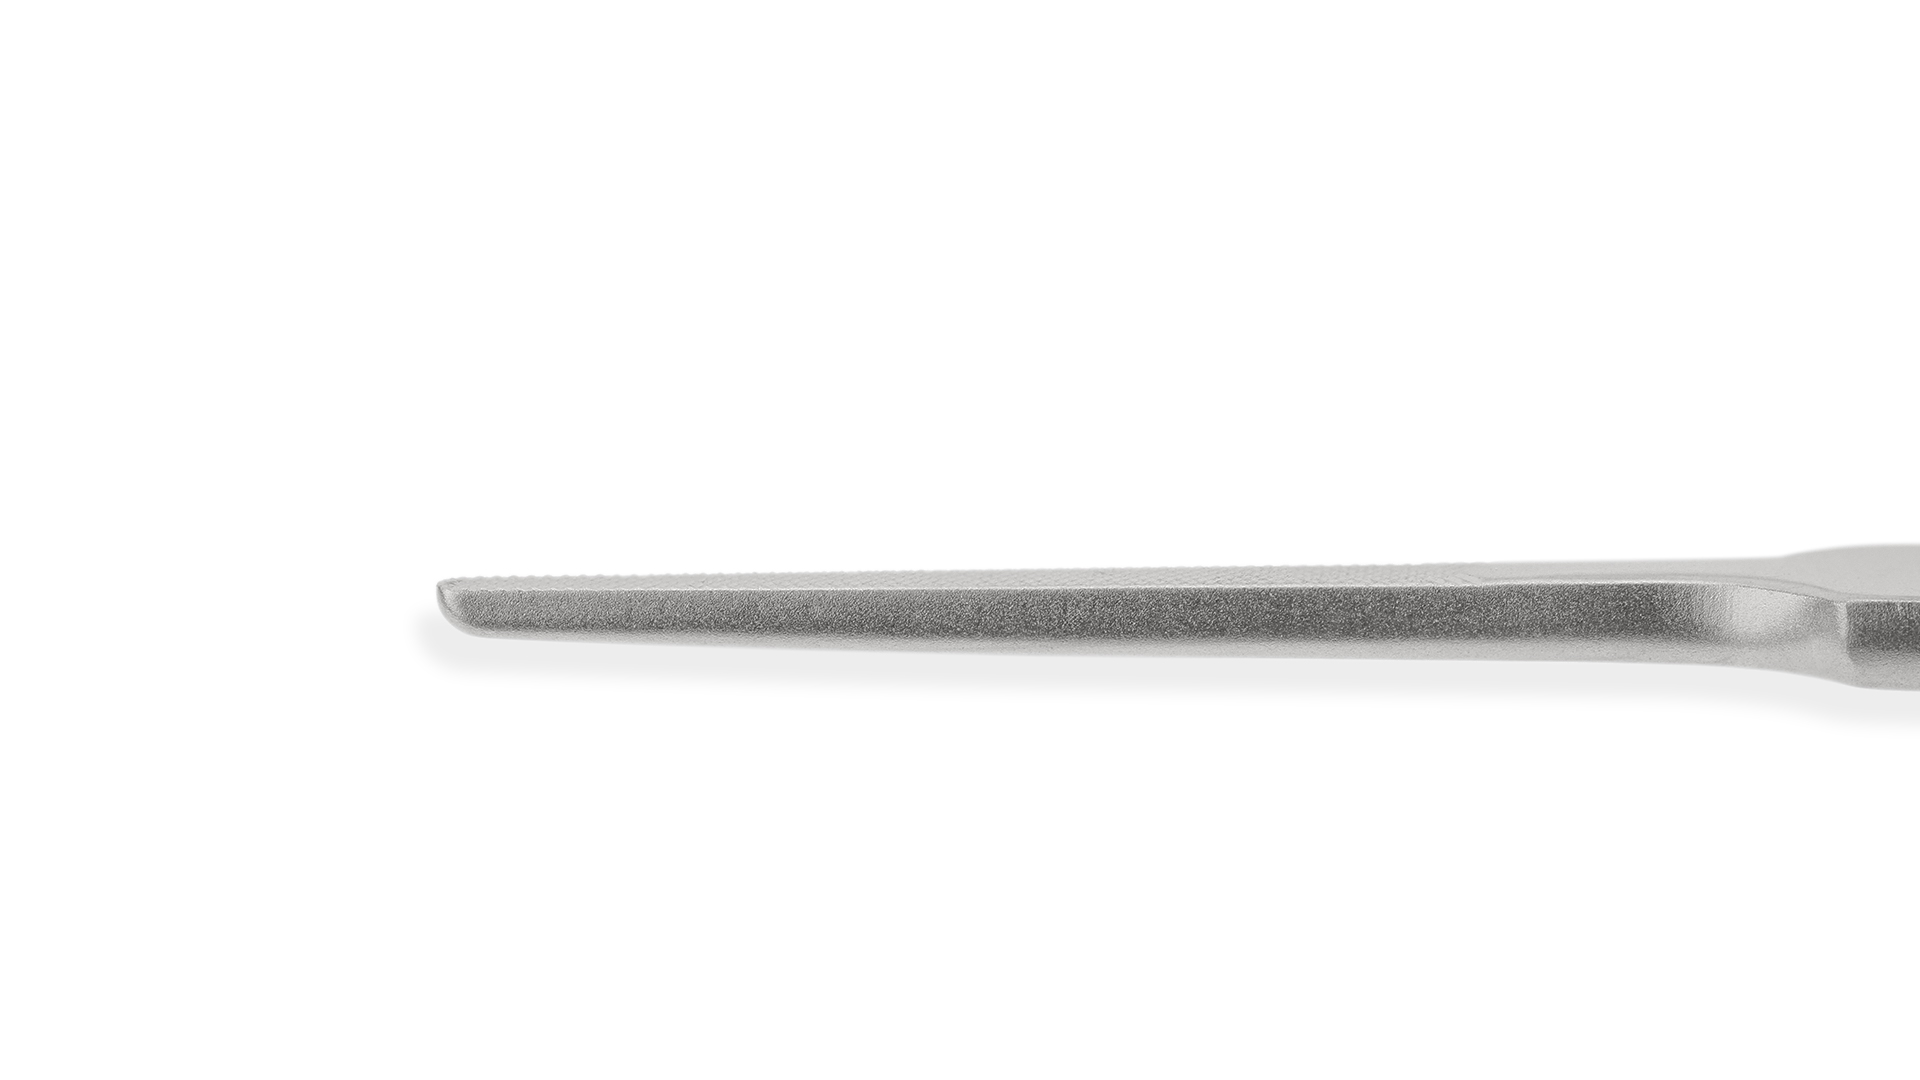 Gerald Forceps - Straight 1mm Cross serrated tips